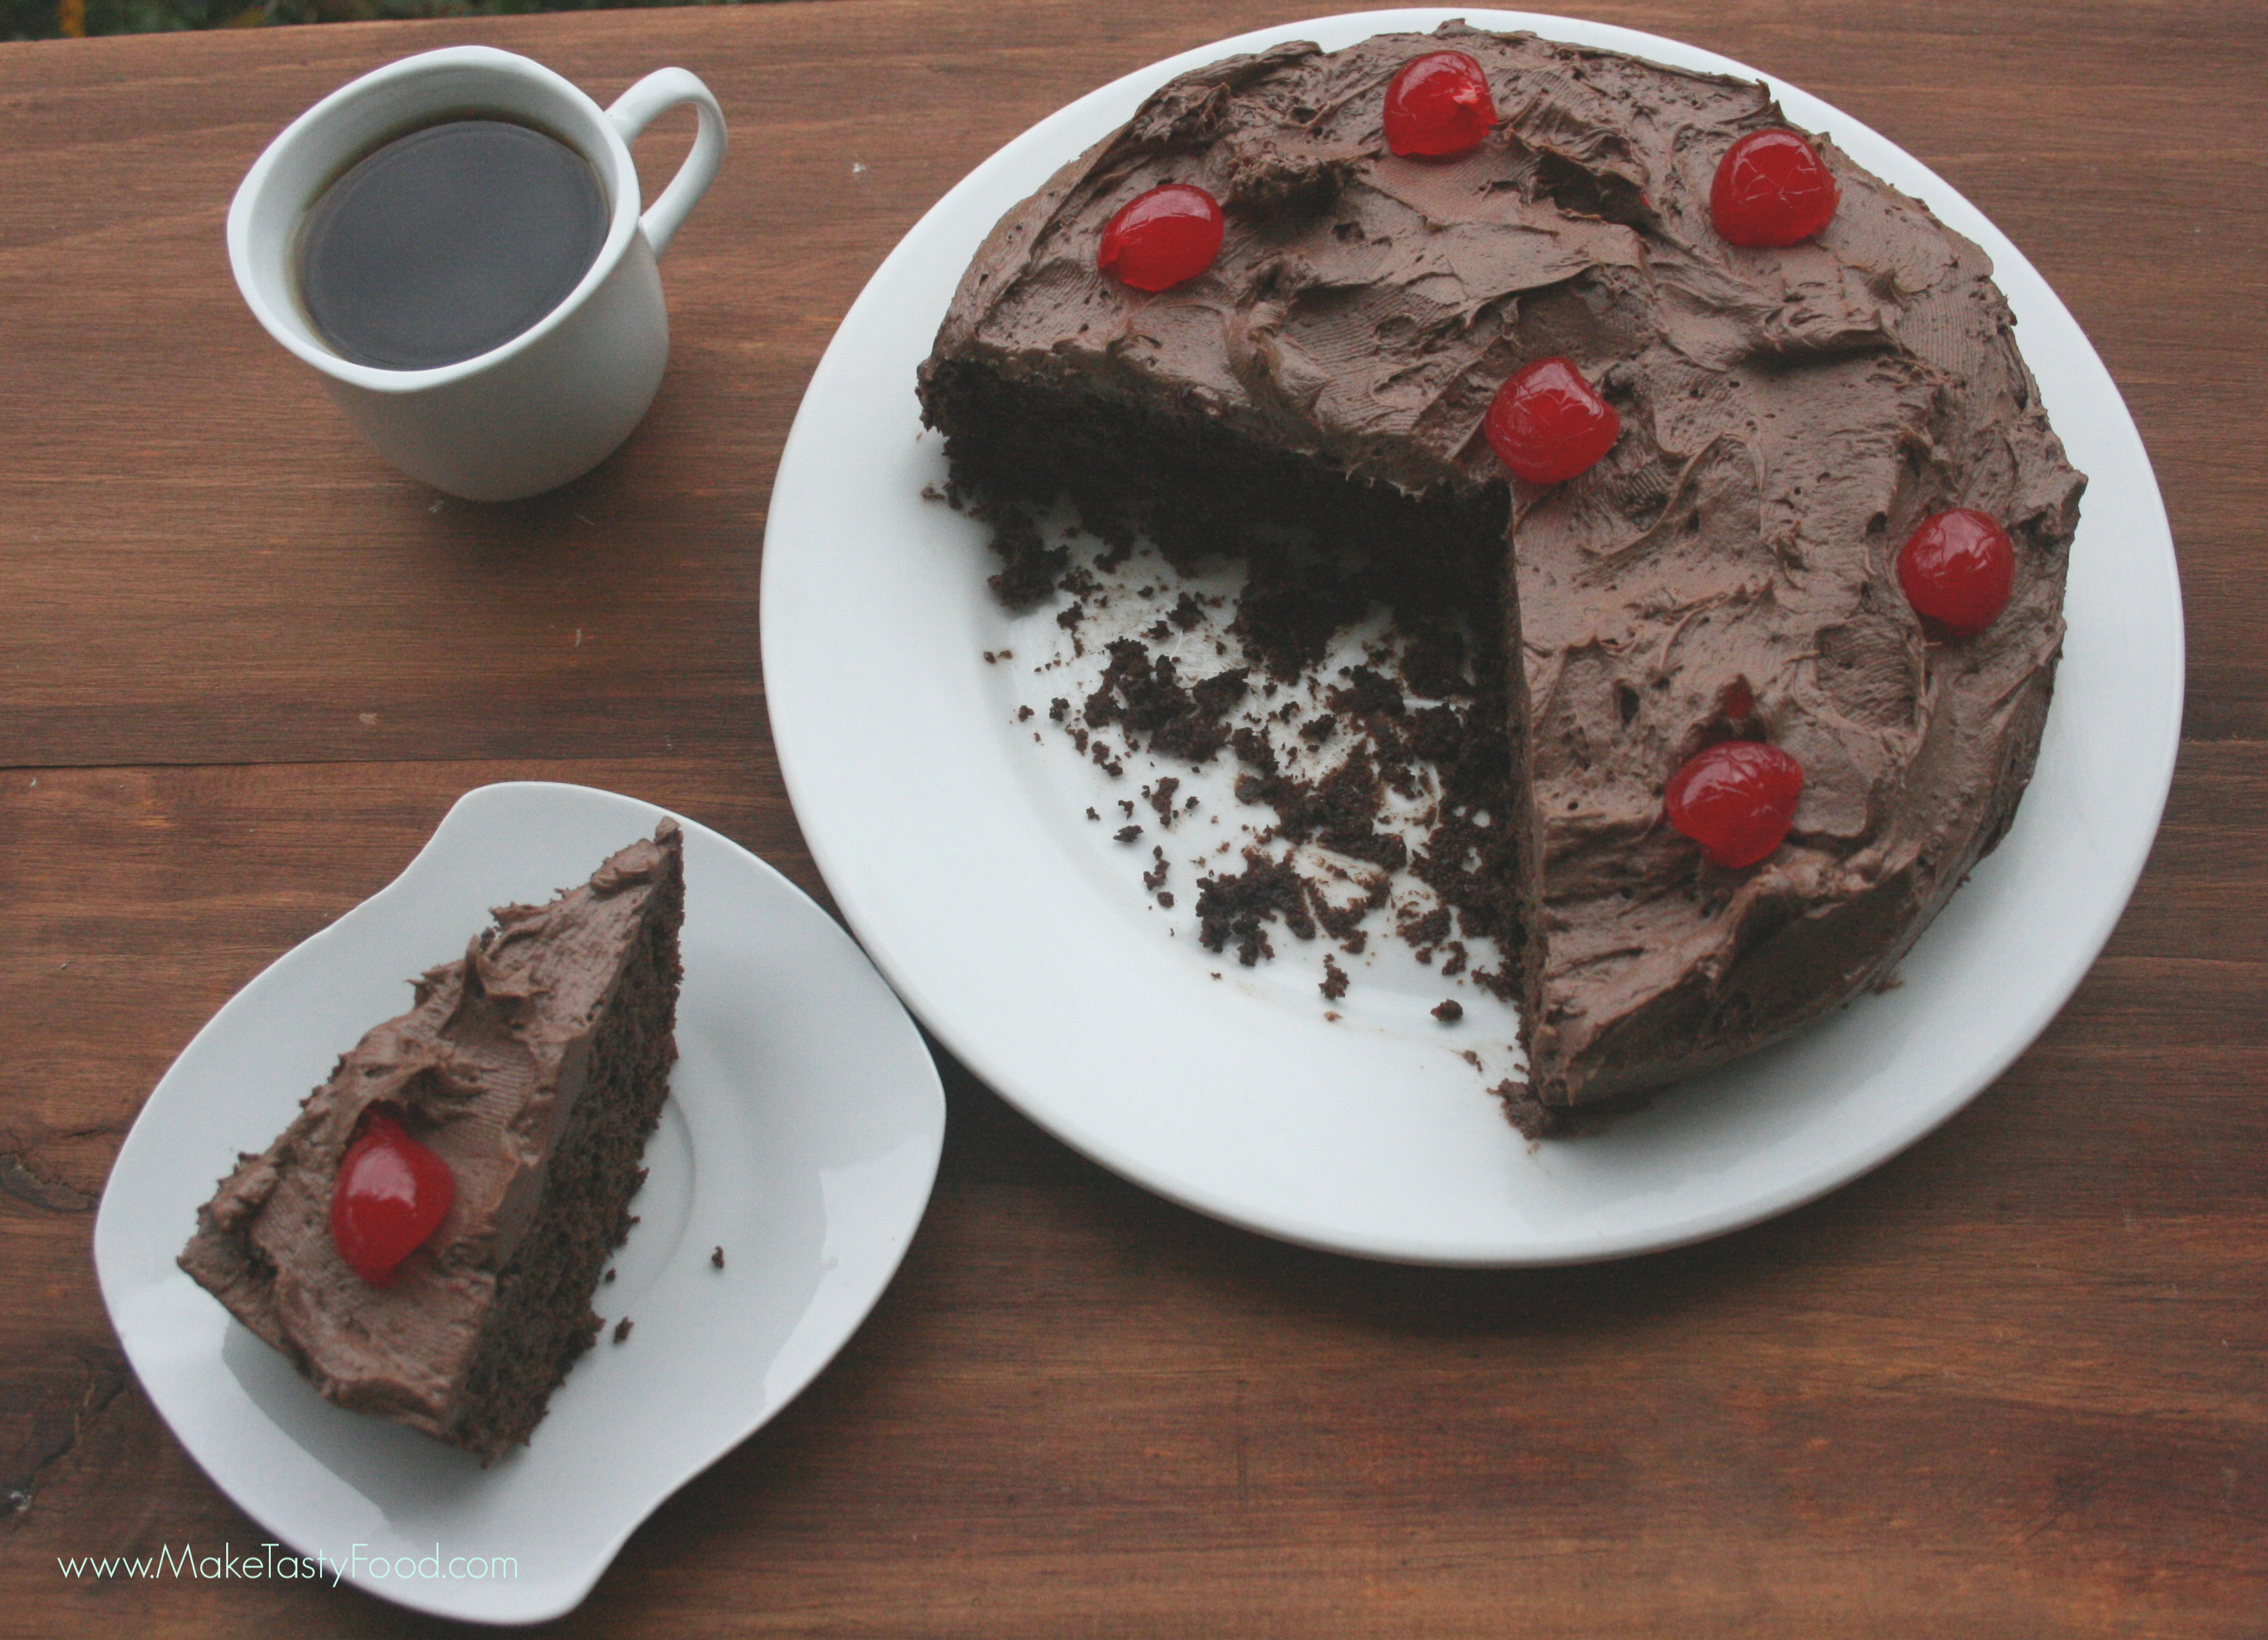 chocolate 7 minute cake oven bake and microwave bake